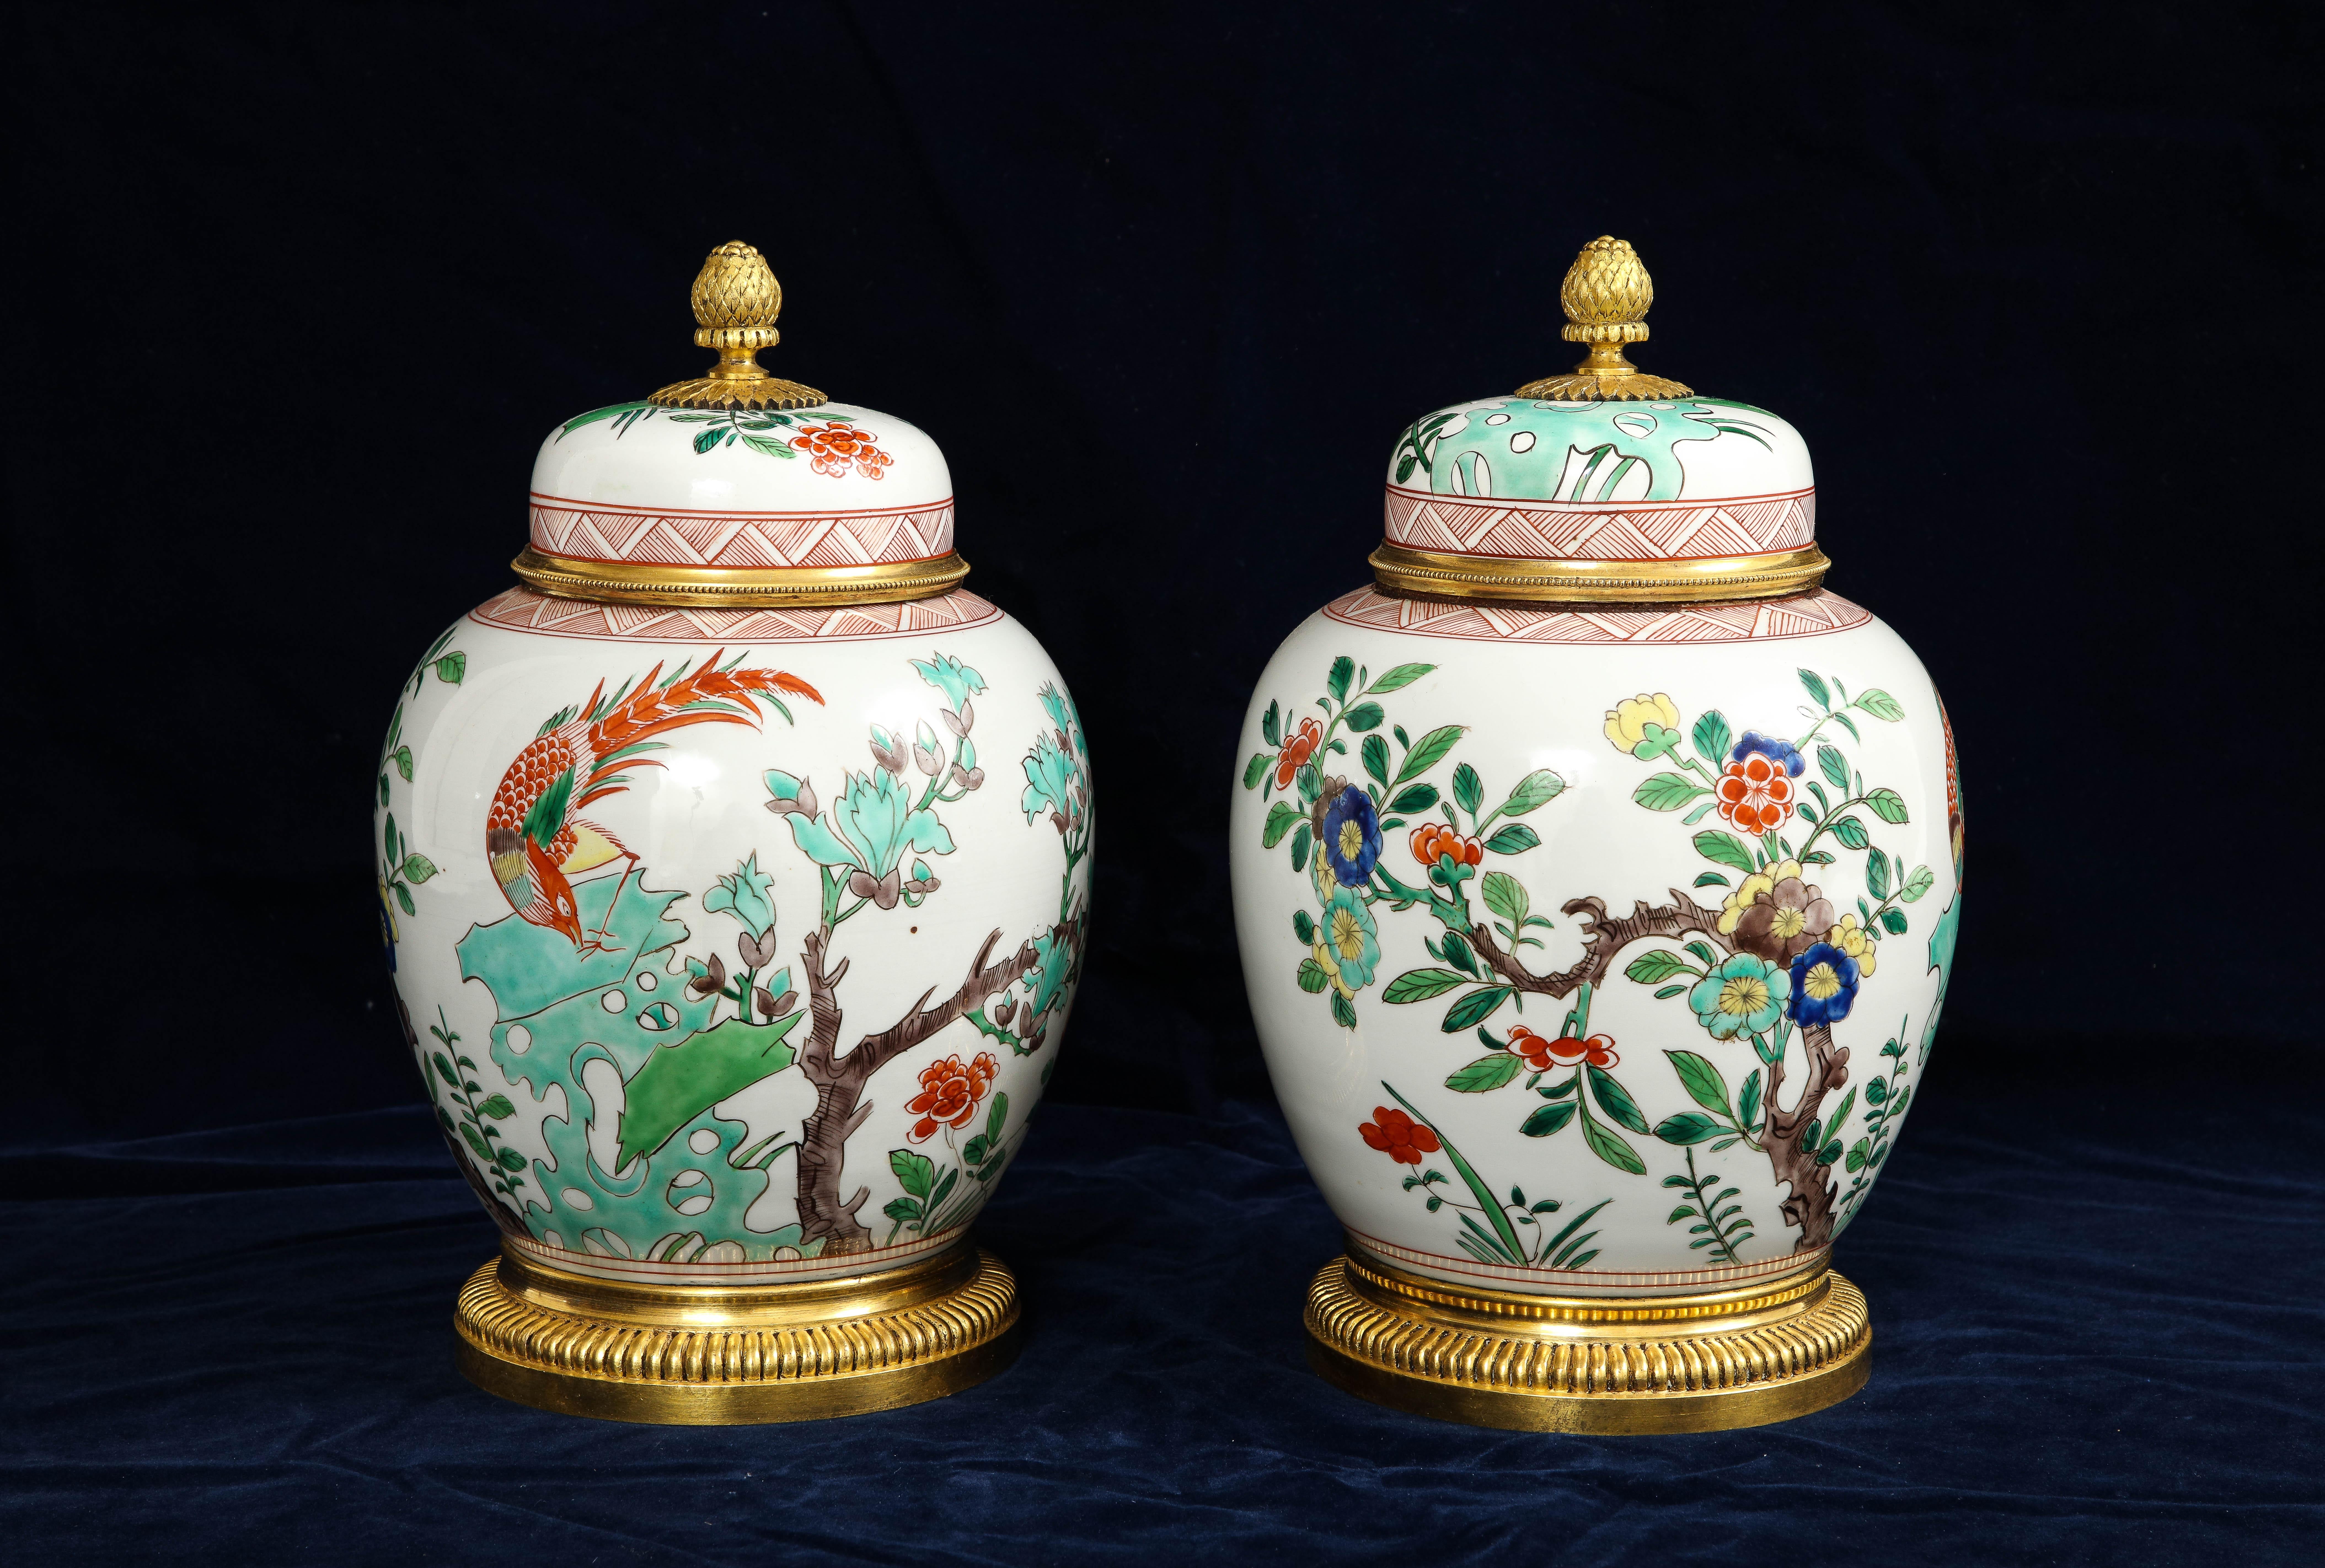 A Marvelous Pair of French Dore Bronze Mounted Chinese Famille Rose Porcelain Covered Vases. Vases are a true marvel of antique artistry. As you admire the stunning matching pair, you will be captivated by the intricate details of the hand painted